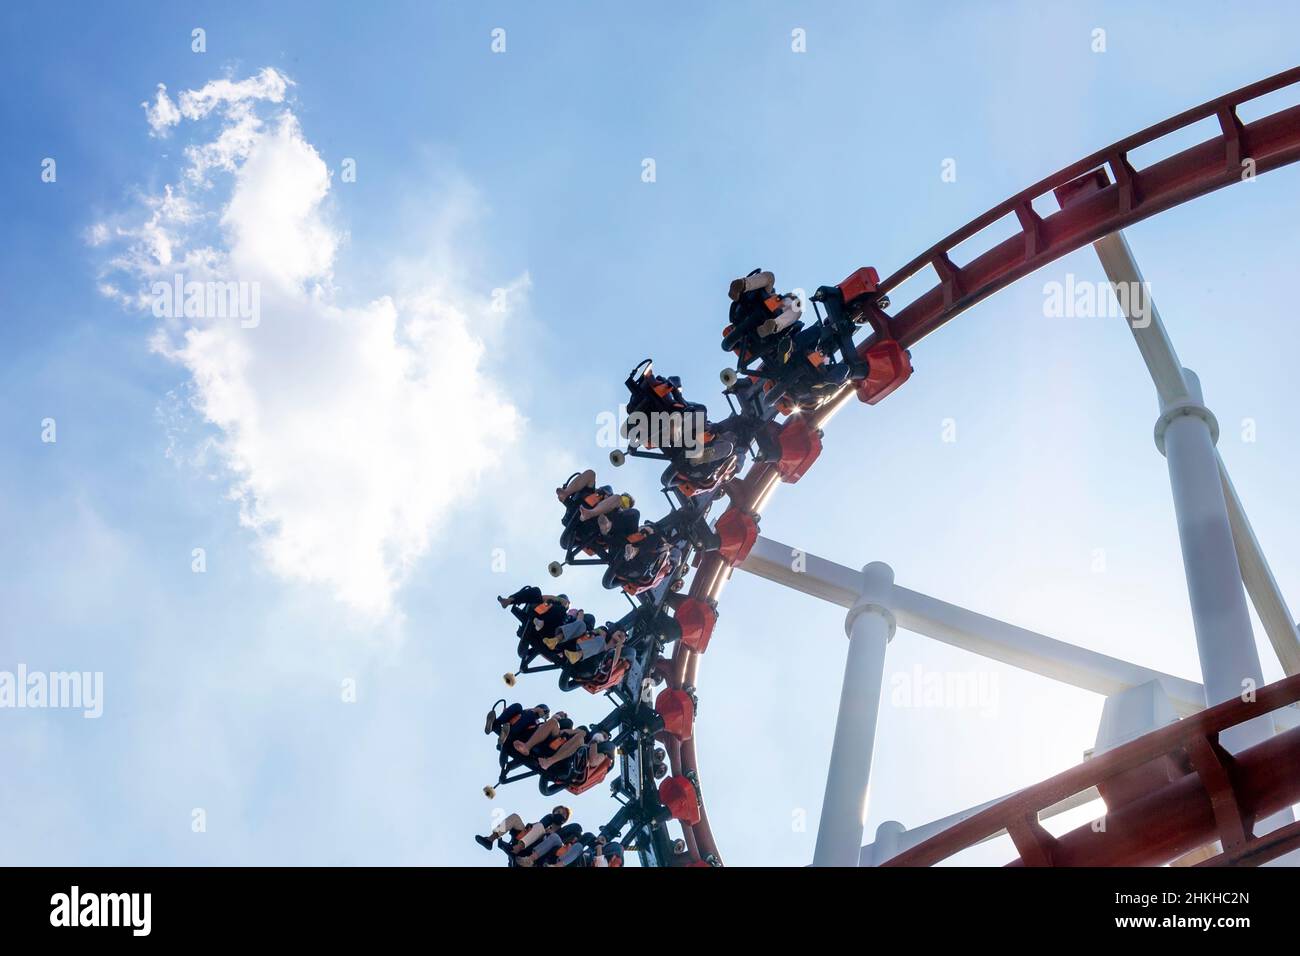 happy fun holiday of rollercoaster with passenger riding on clear summer sky Stock Photo